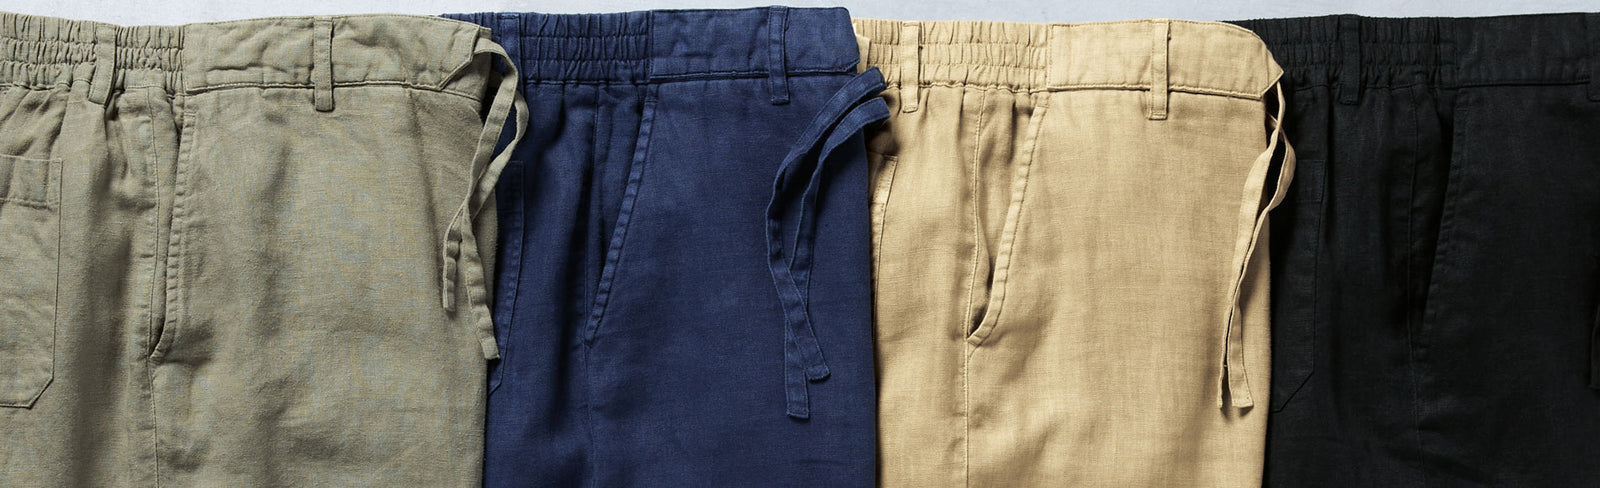 Mens Casual Cargo Cotton Pants With Pocket Loose Fit, Elastic Work Cotton  Trousers Men For Joggers, Super Large Size 6XL 220924 From Bai06, $18.84 |  DHgate.Com